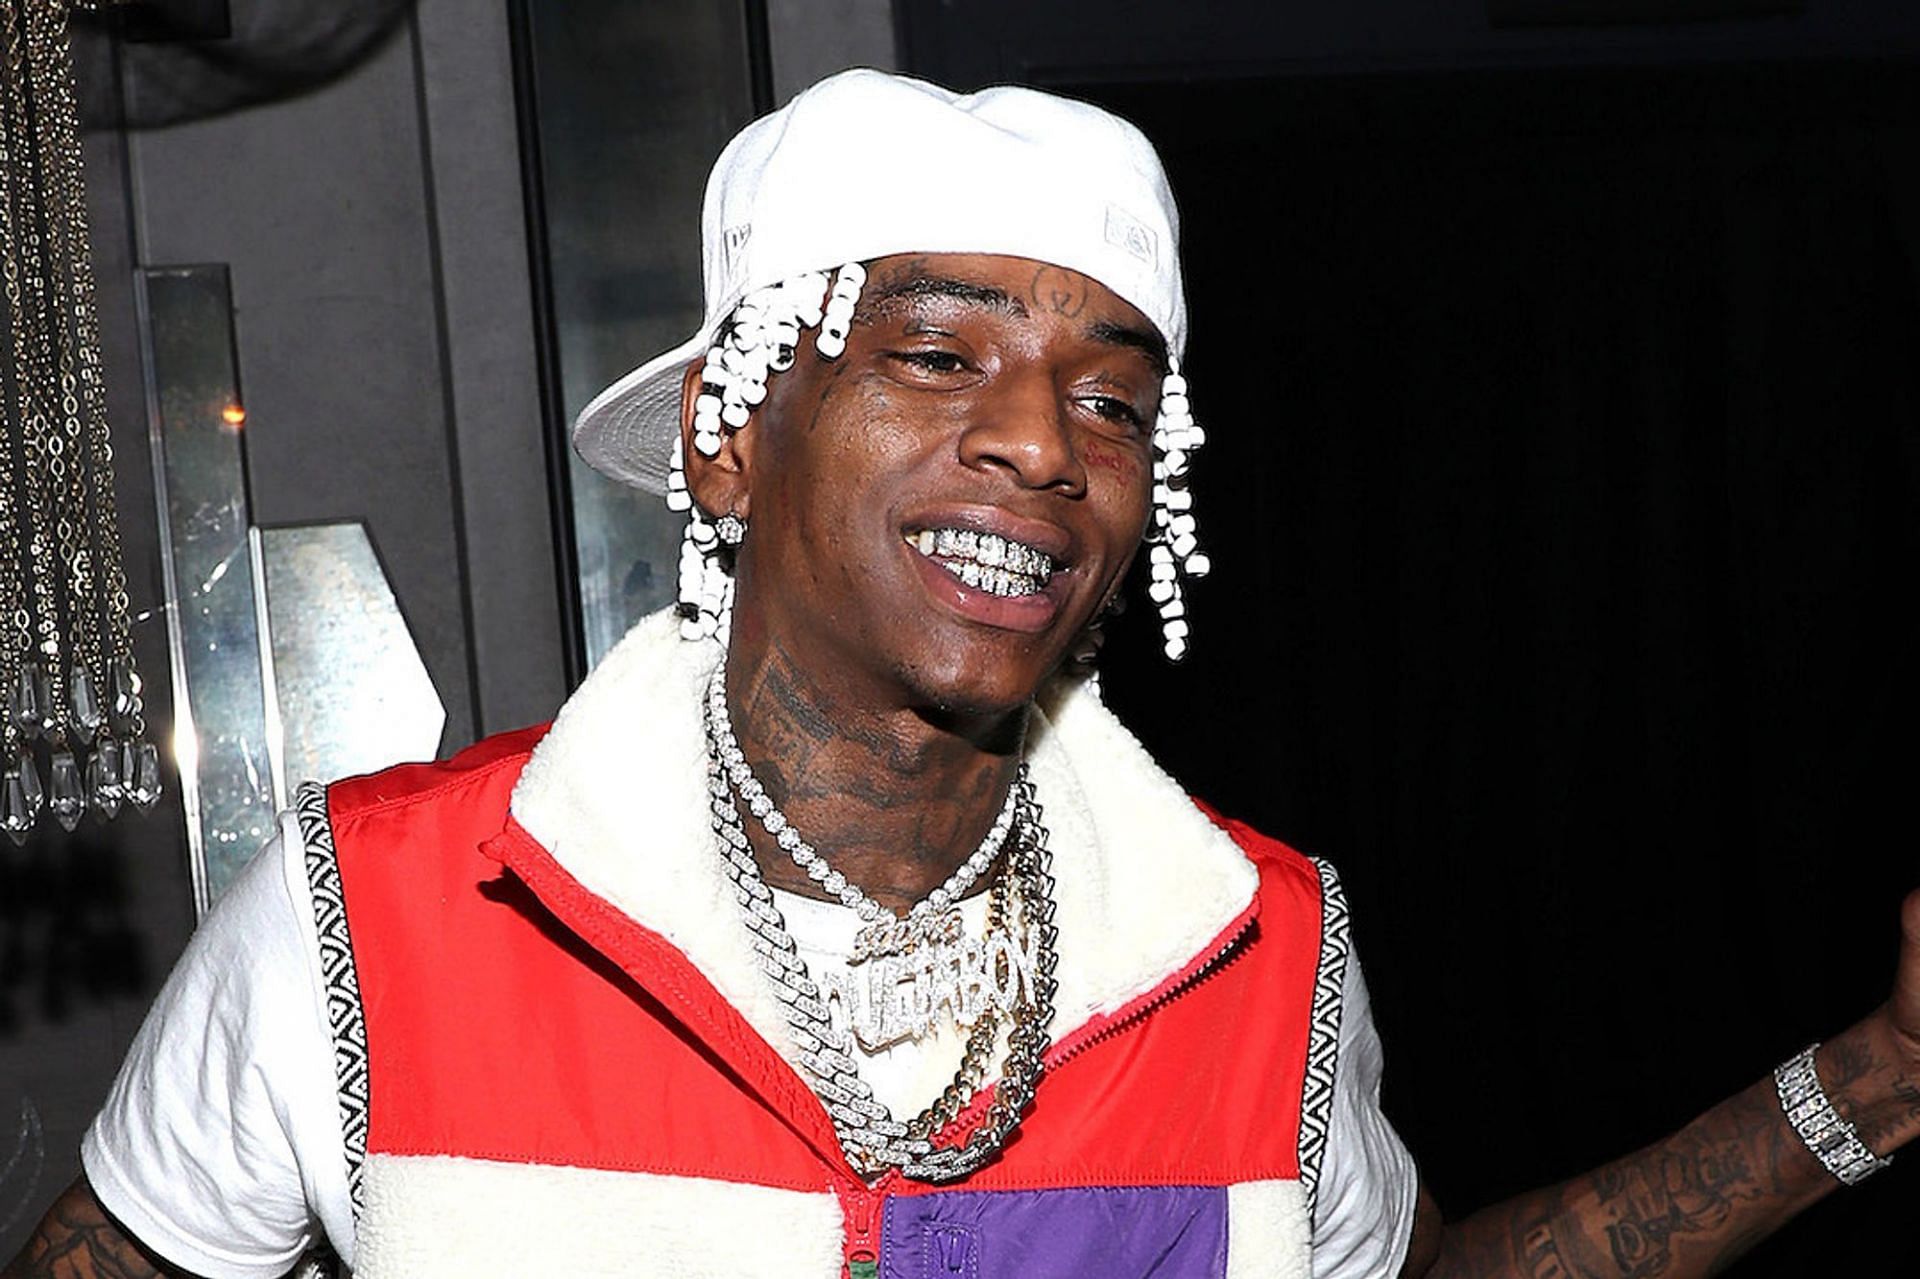 Soulja Boy goes viral after pictures of his alleged grills surface online (Image via Getty Images)